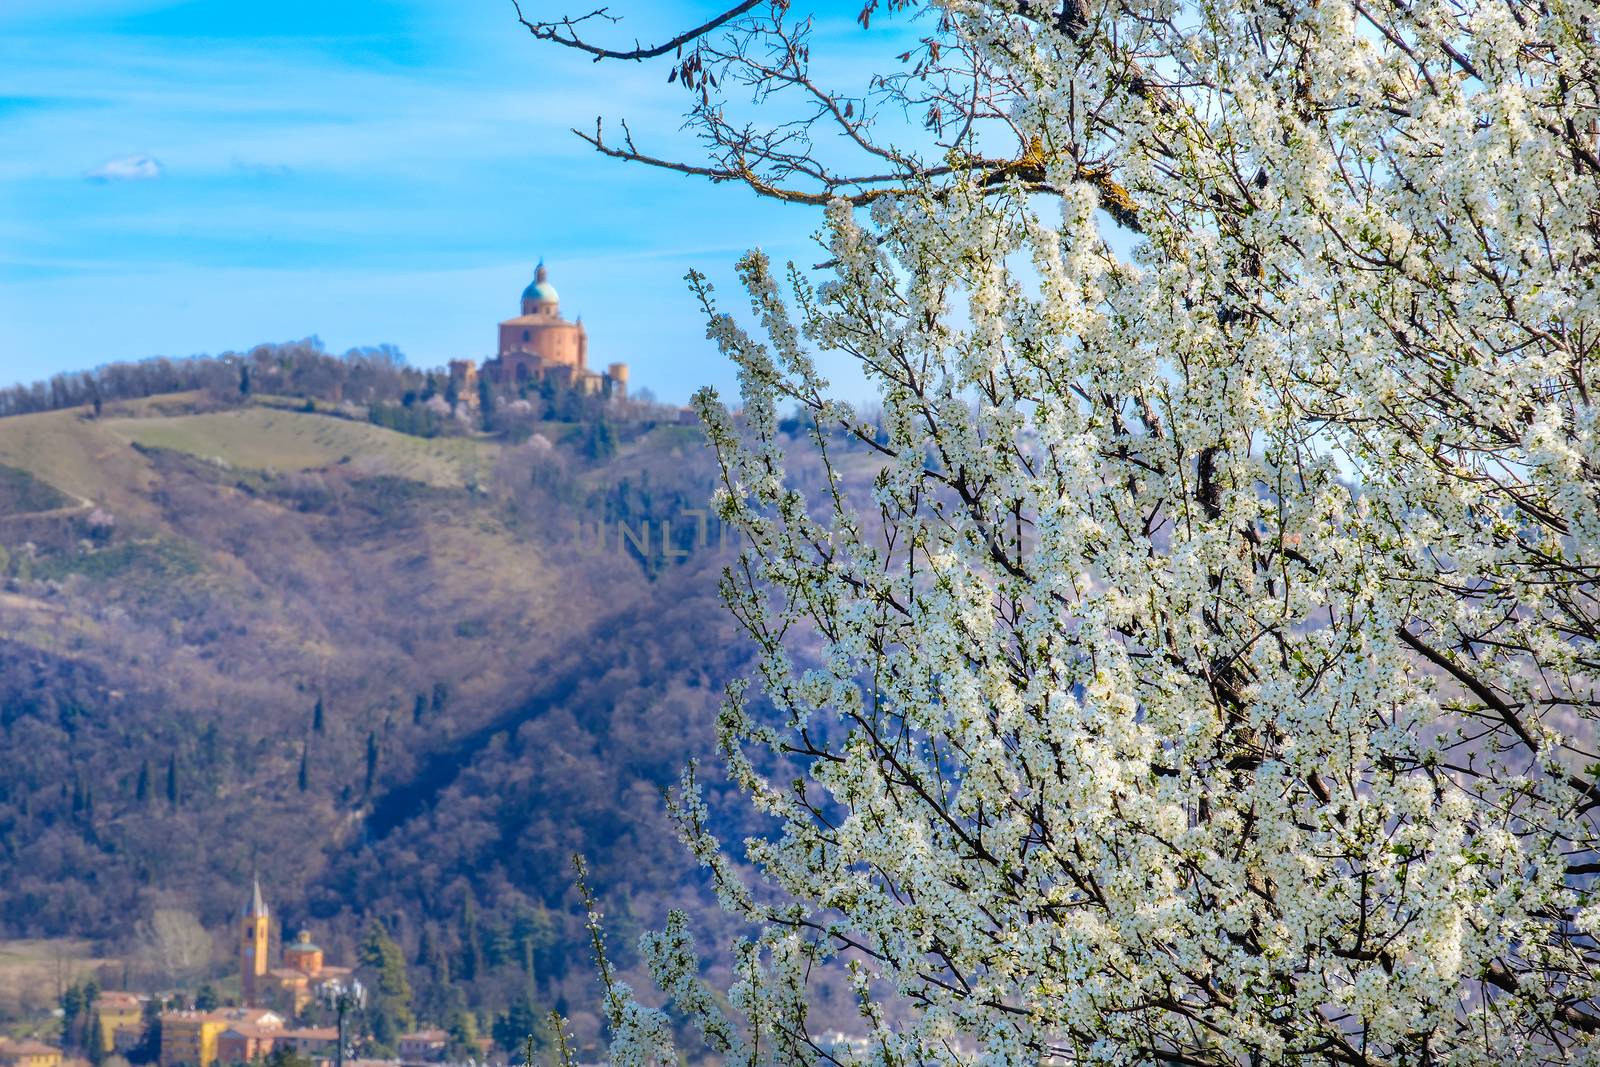 blackthorn tree background bologna in spring - San Luca  Colli Bolognesi area - Italy by LucaLorenzelli